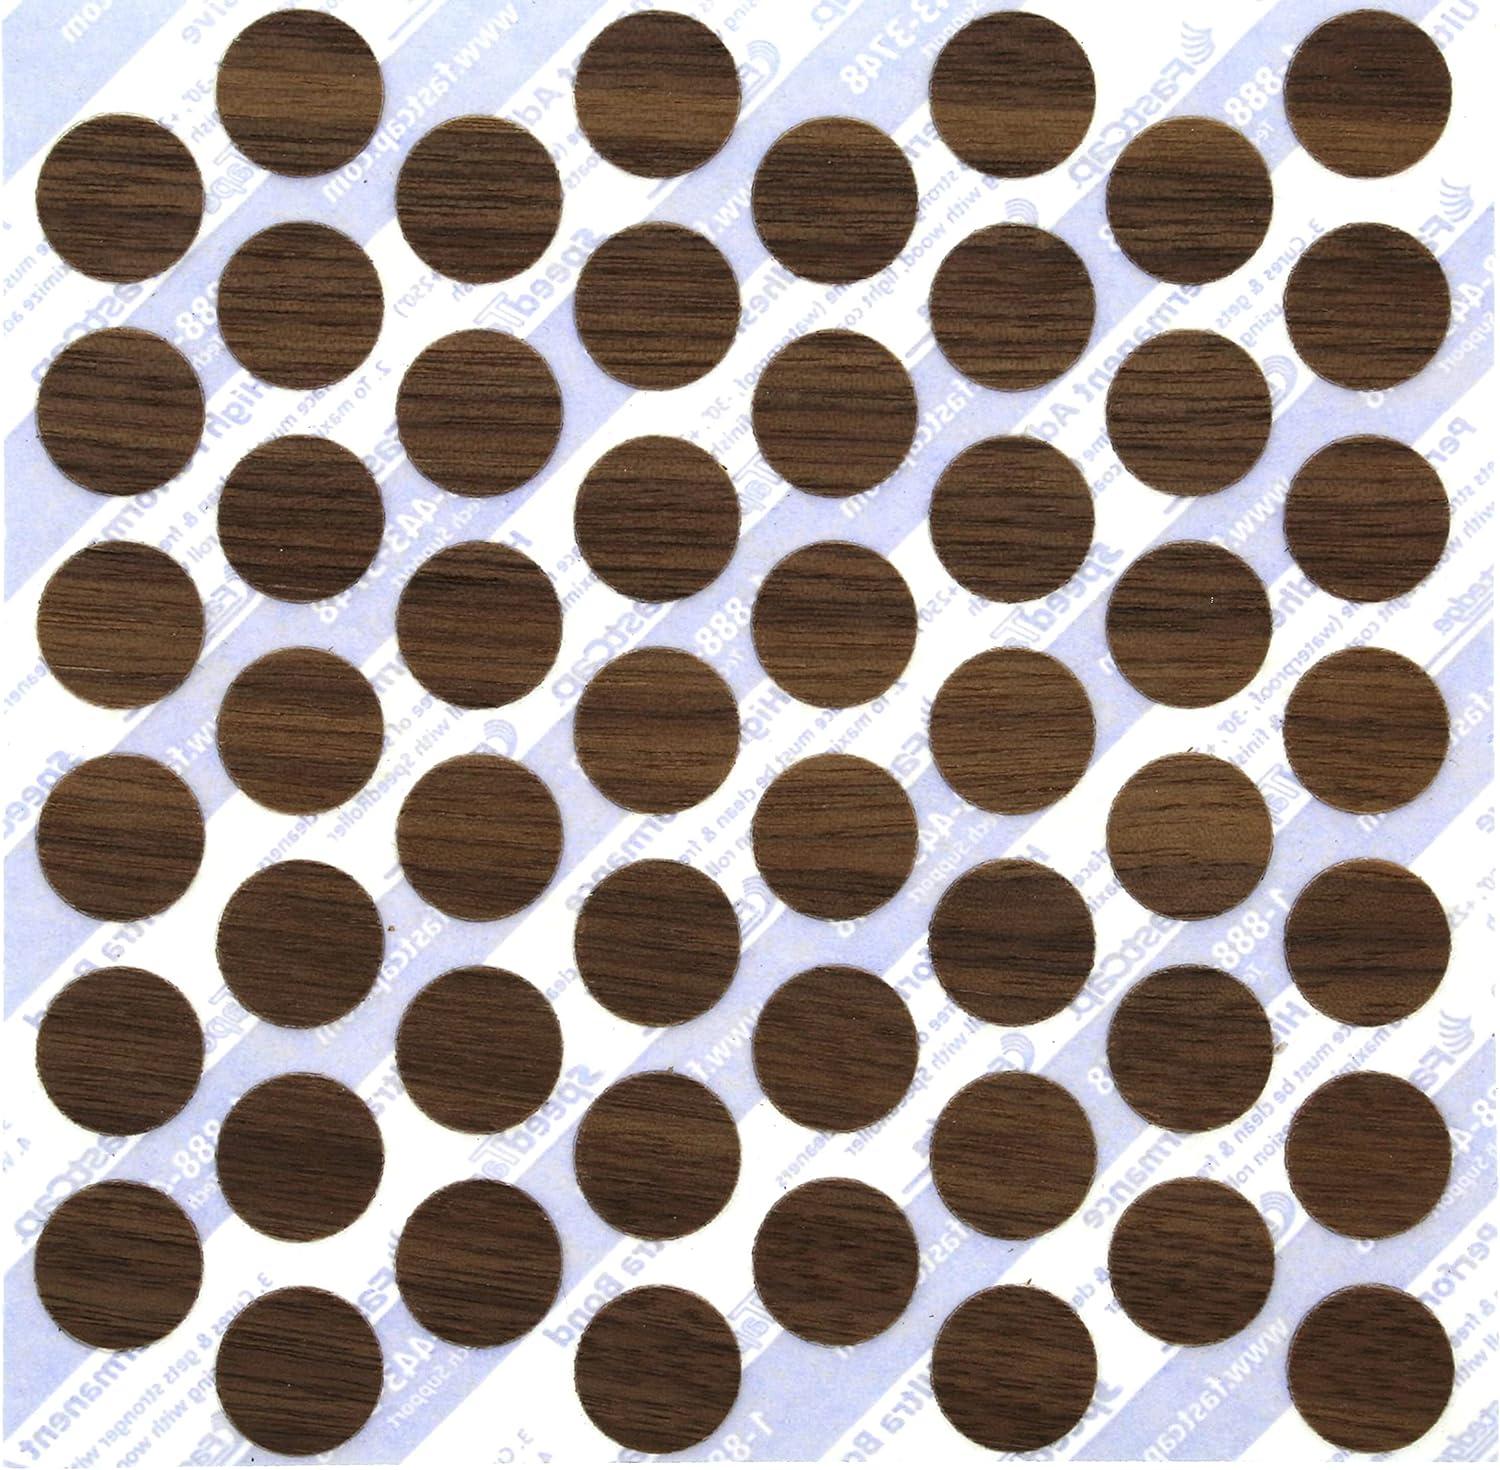 FastCap Adhesive Cover Caps Pre-Finished Wood Walnut 9/16" (1 Sheet 52 Caps)